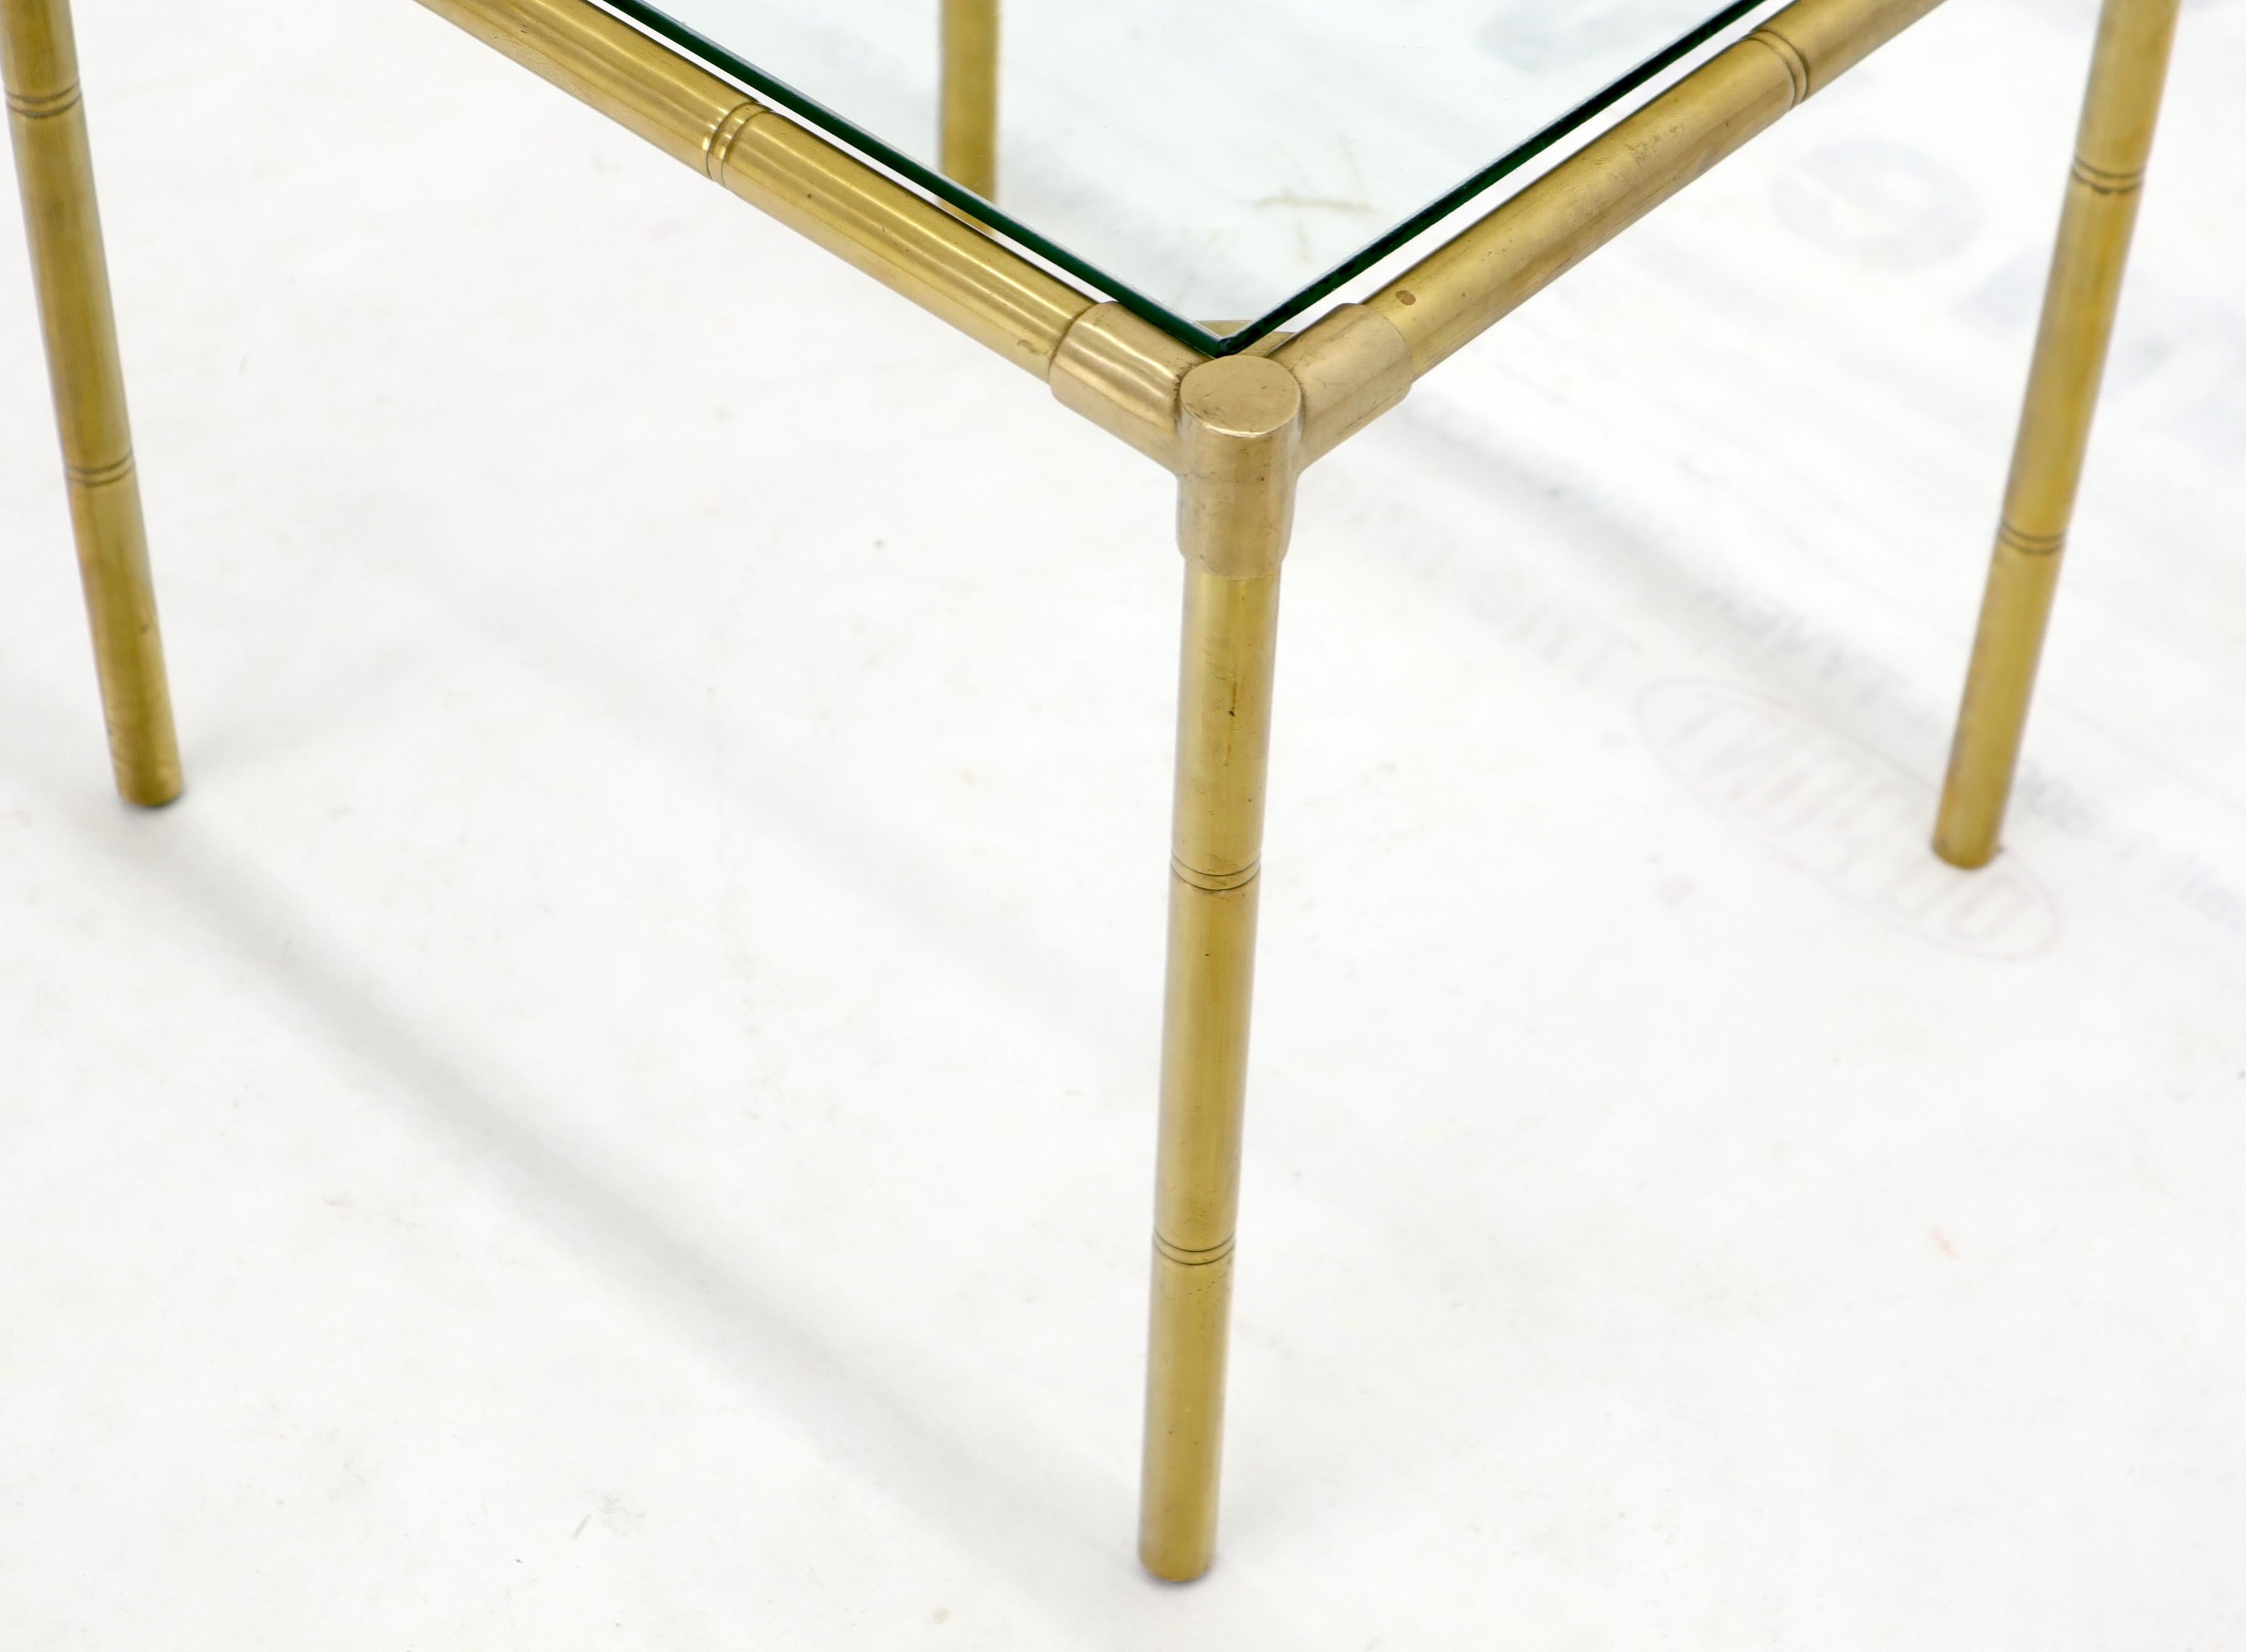 Quality Solid Brass Faux Bamboo Italian Mid Modern Nesting Tables For Sale 6